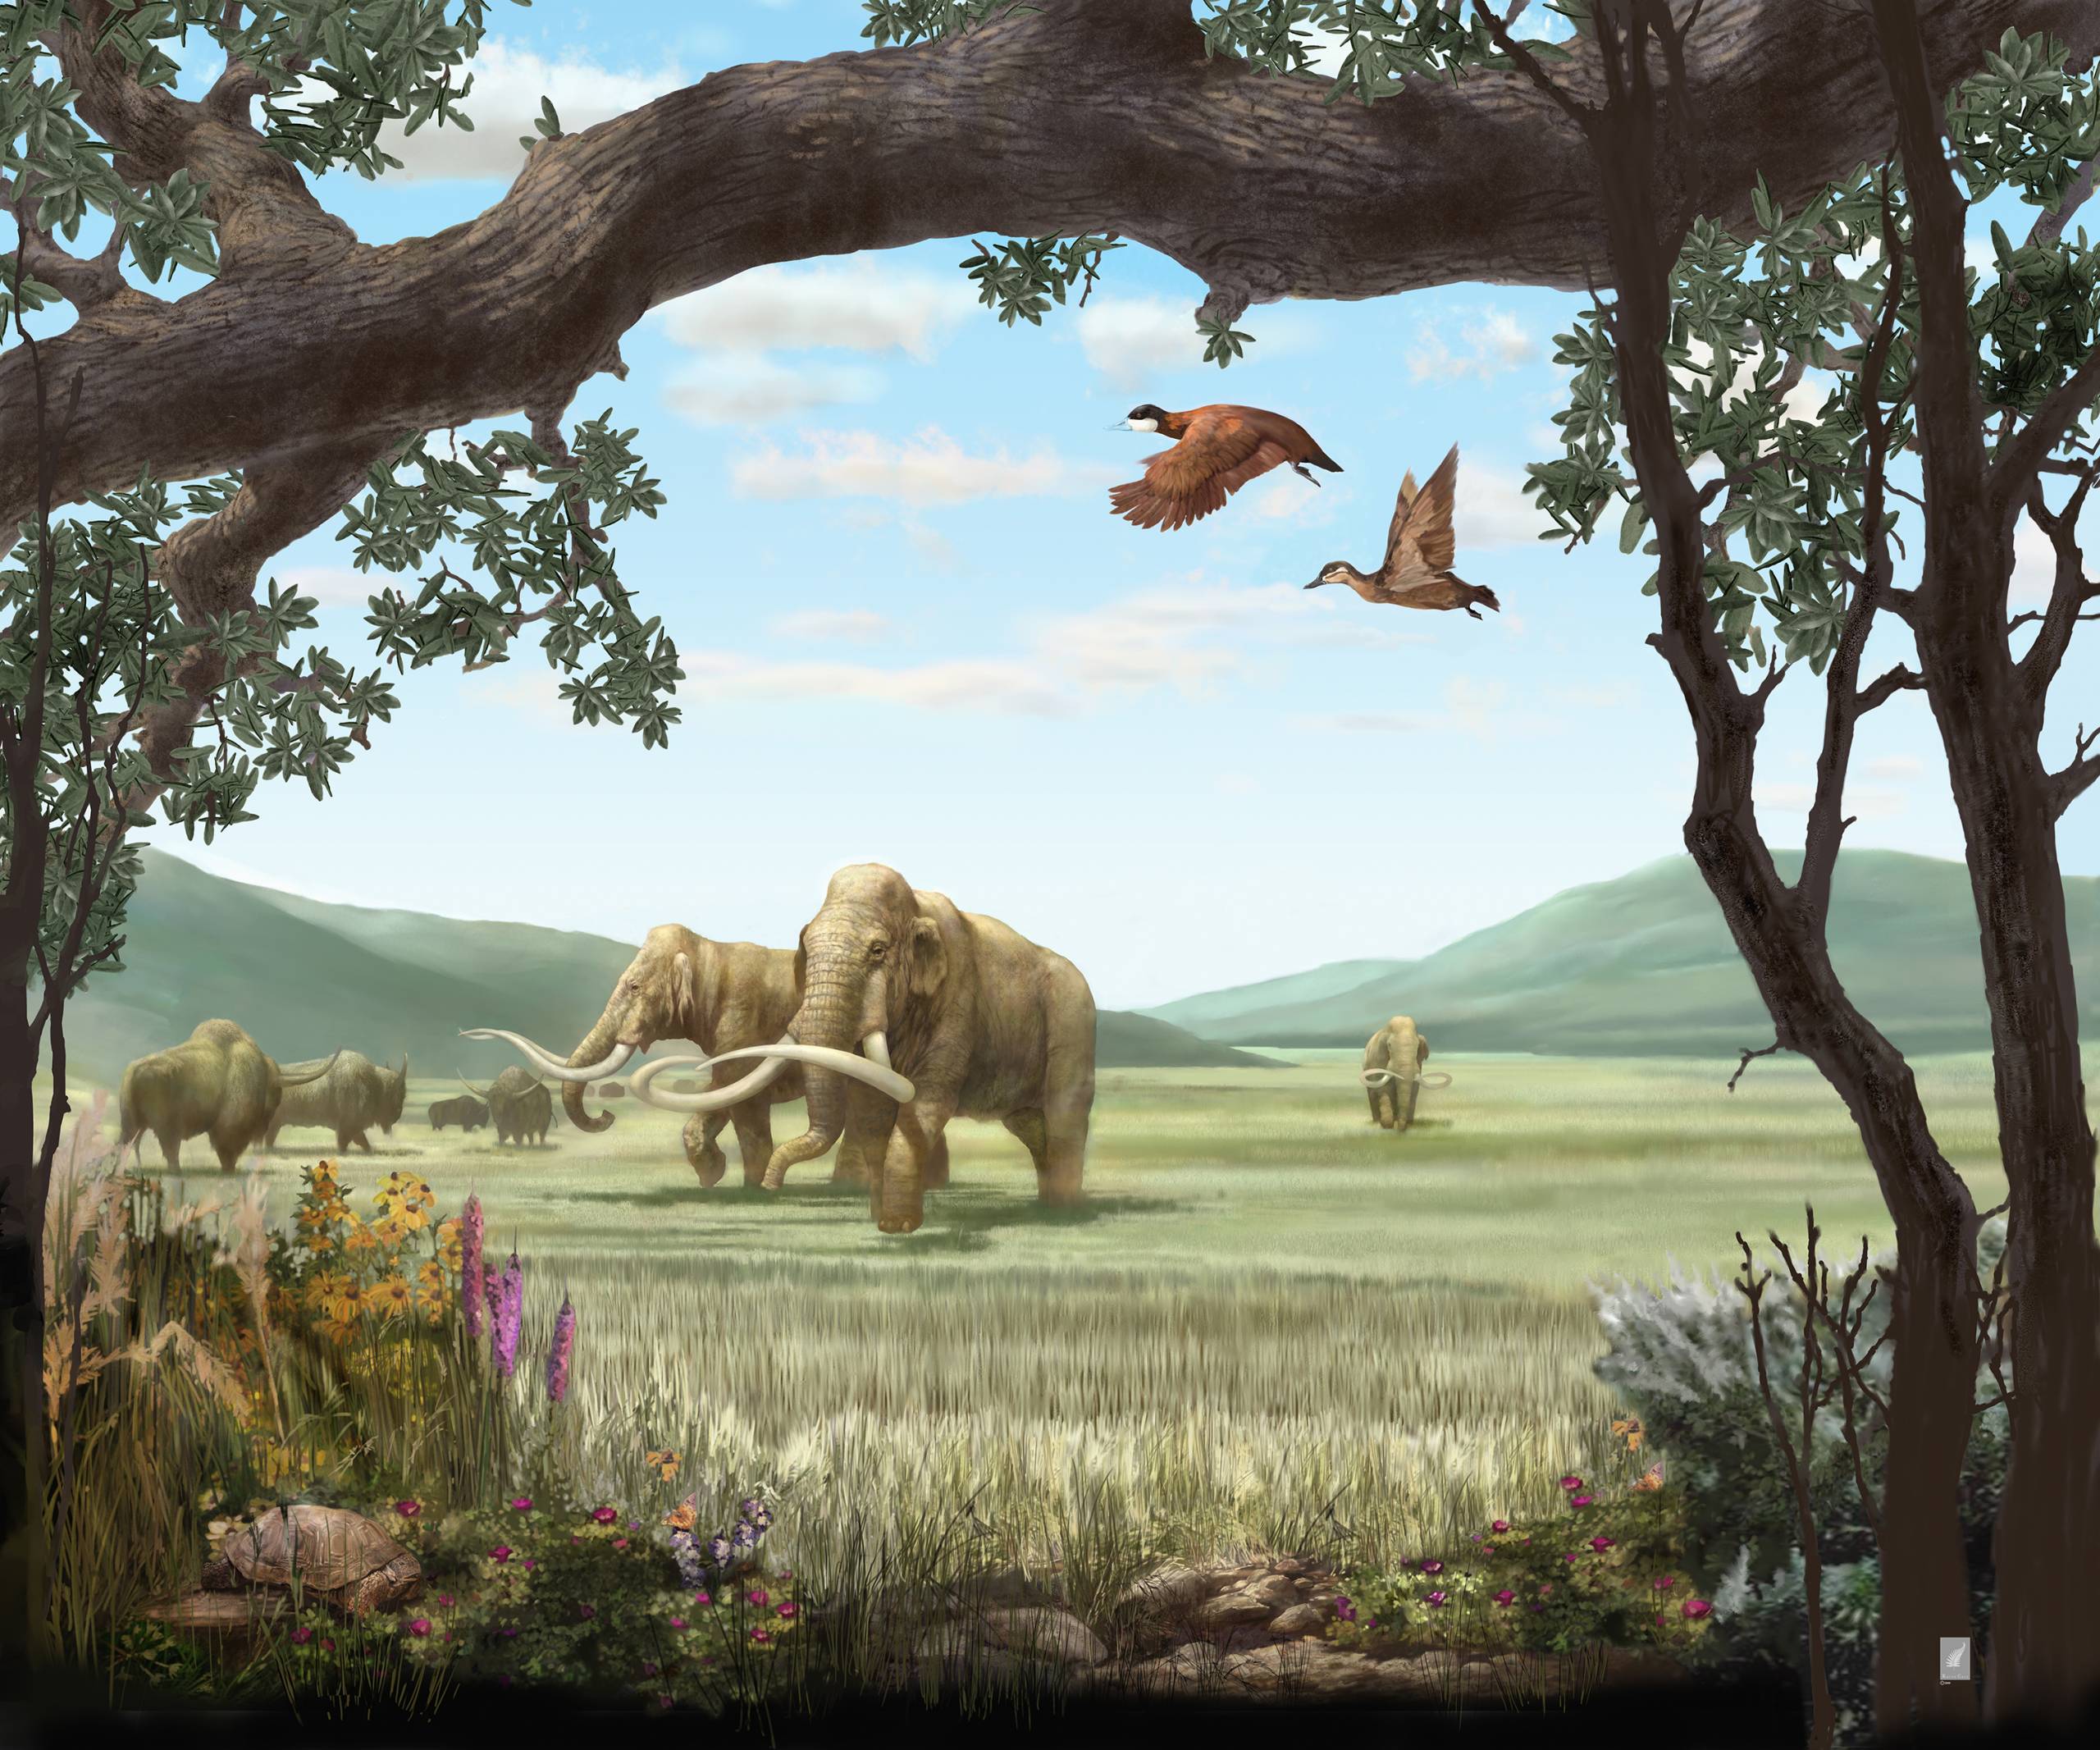 The Bay Area During the Ice Age (Think Saber-Tooth Cats and Mammoths) | KQED